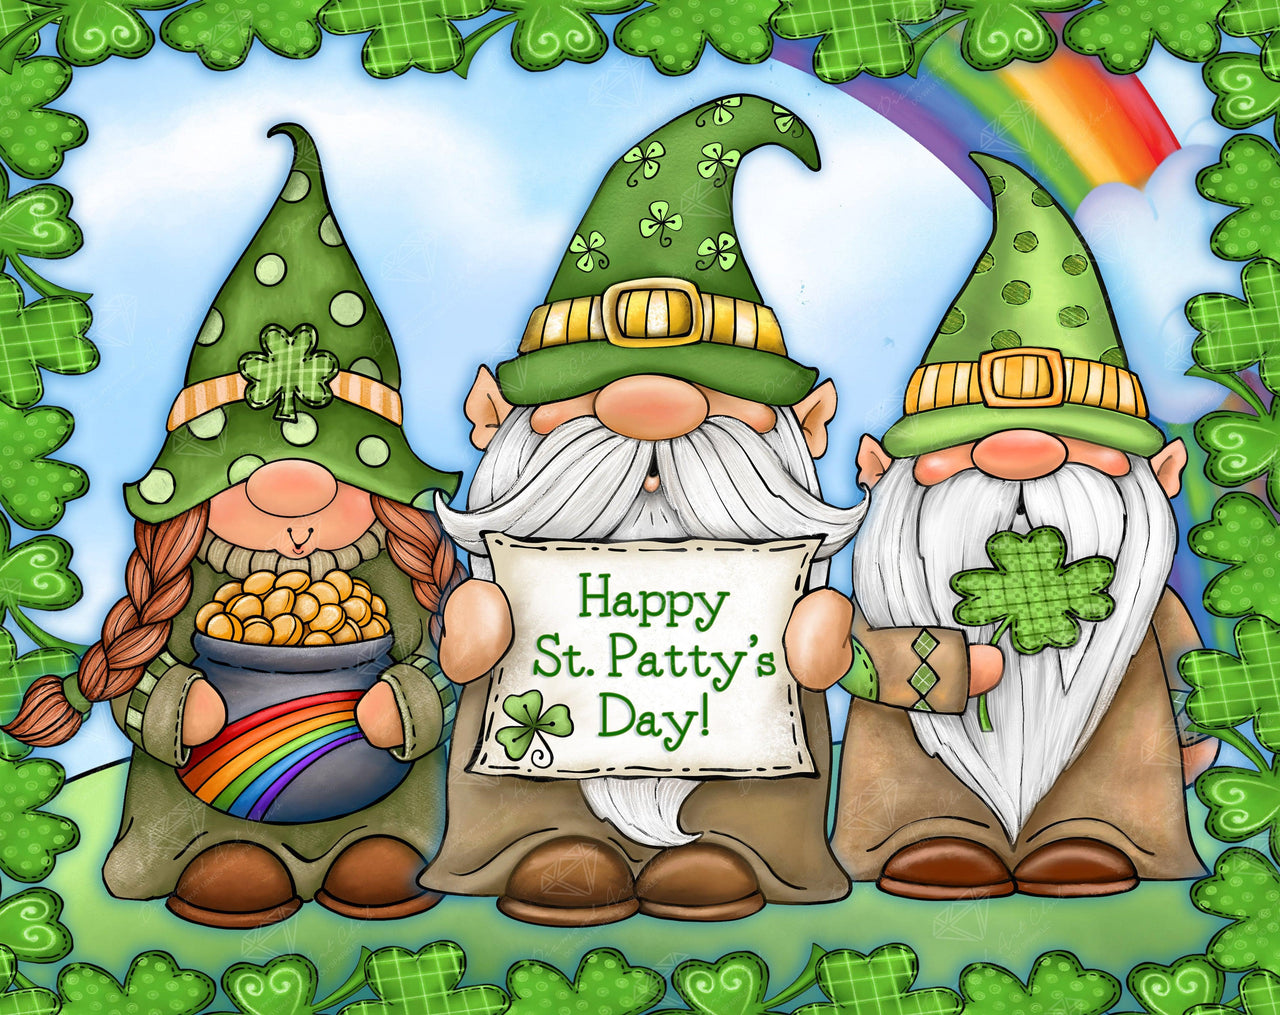 Diamond Painting St. Patrick's Day Gnomes 28" x 22" (71cm x 56cm) / Round with 55 Colors including 5 ABs / 49,949